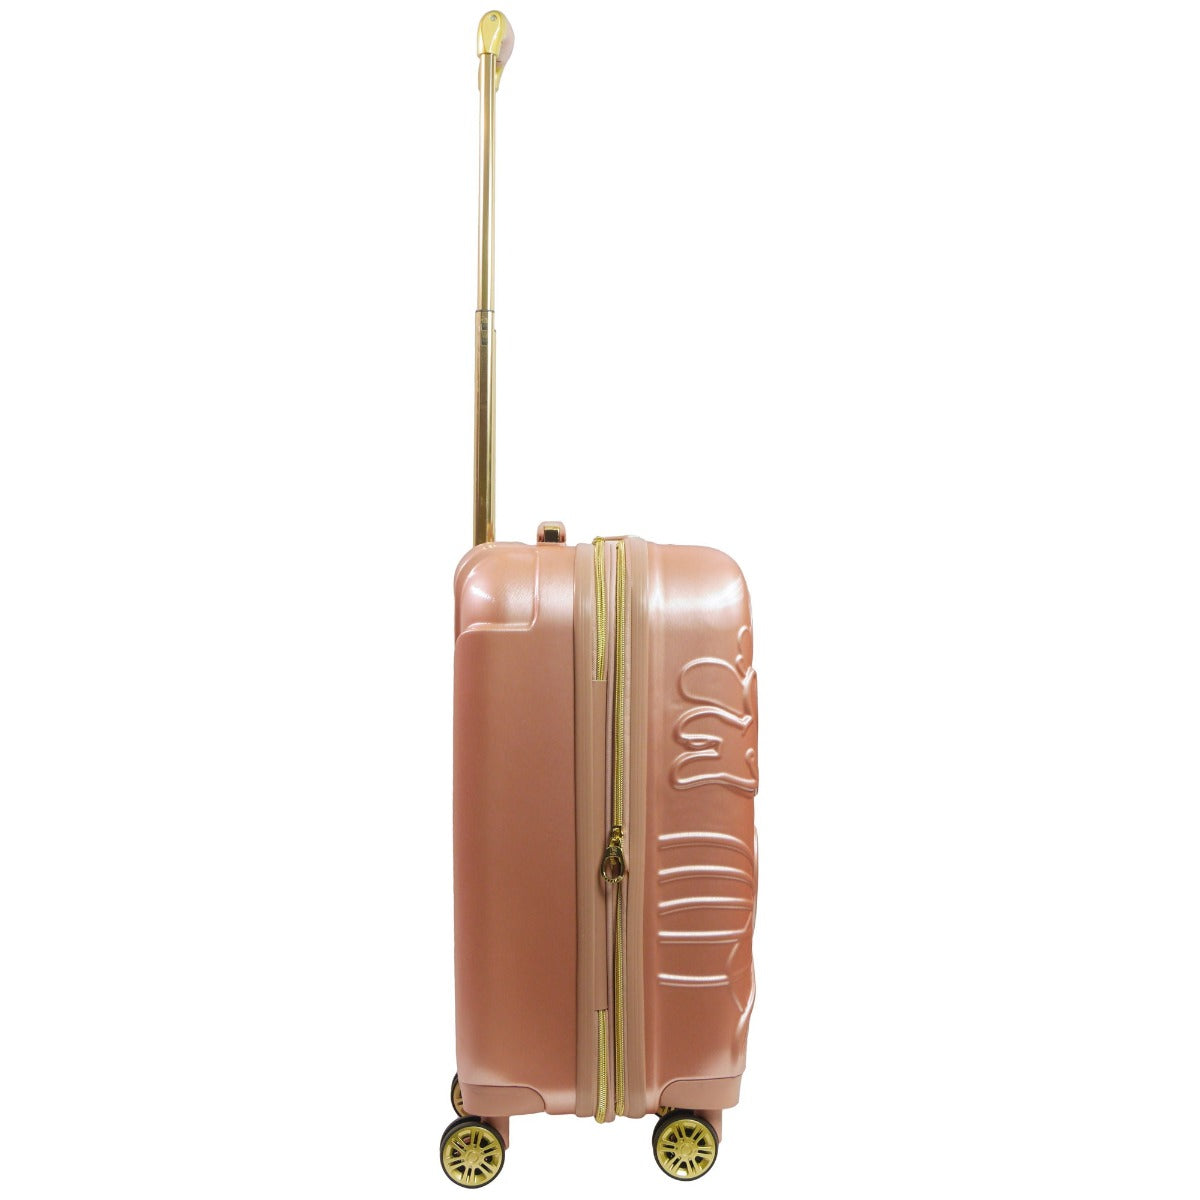 Ful Embossed Disney Mickey Mouse hardsided spinner suitcase 22" carry on luggage rose gold expandable 2" gusset 